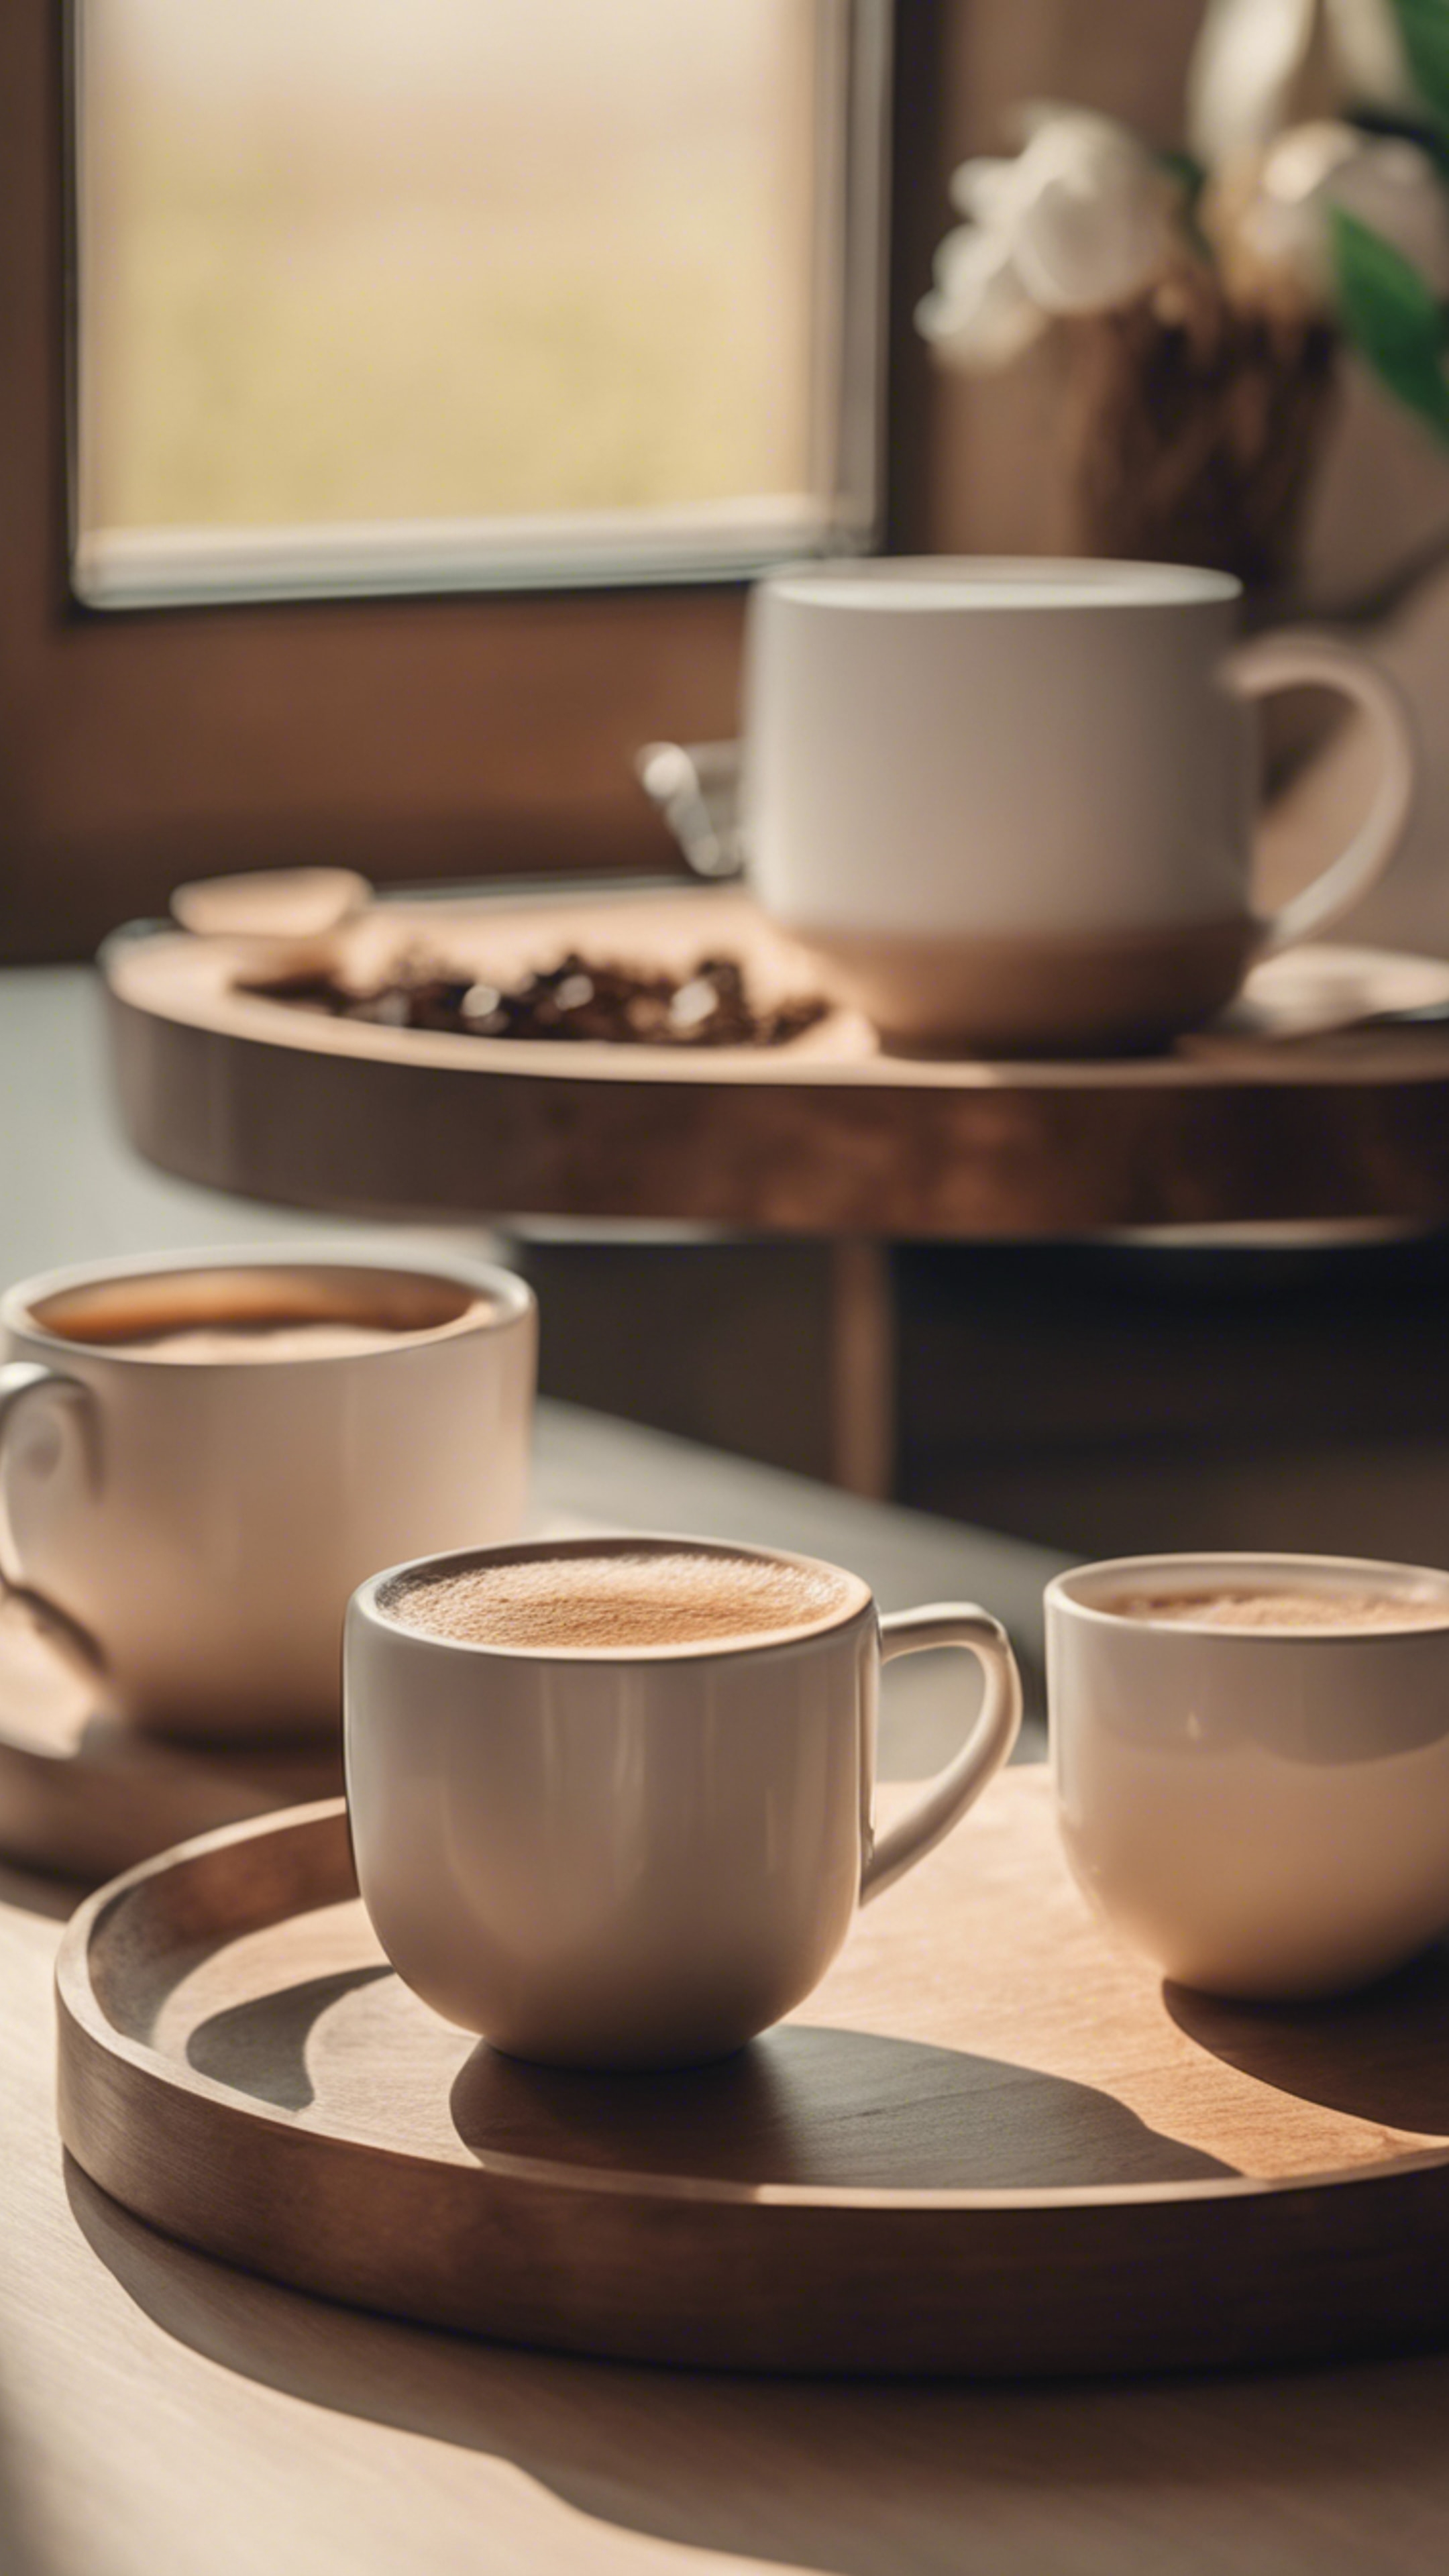 Beige-colored, minimalist coffee mugs arranged on a wooden tray with a steaming cup of coffee.壁紙[97c5bfefb7d545508caa]